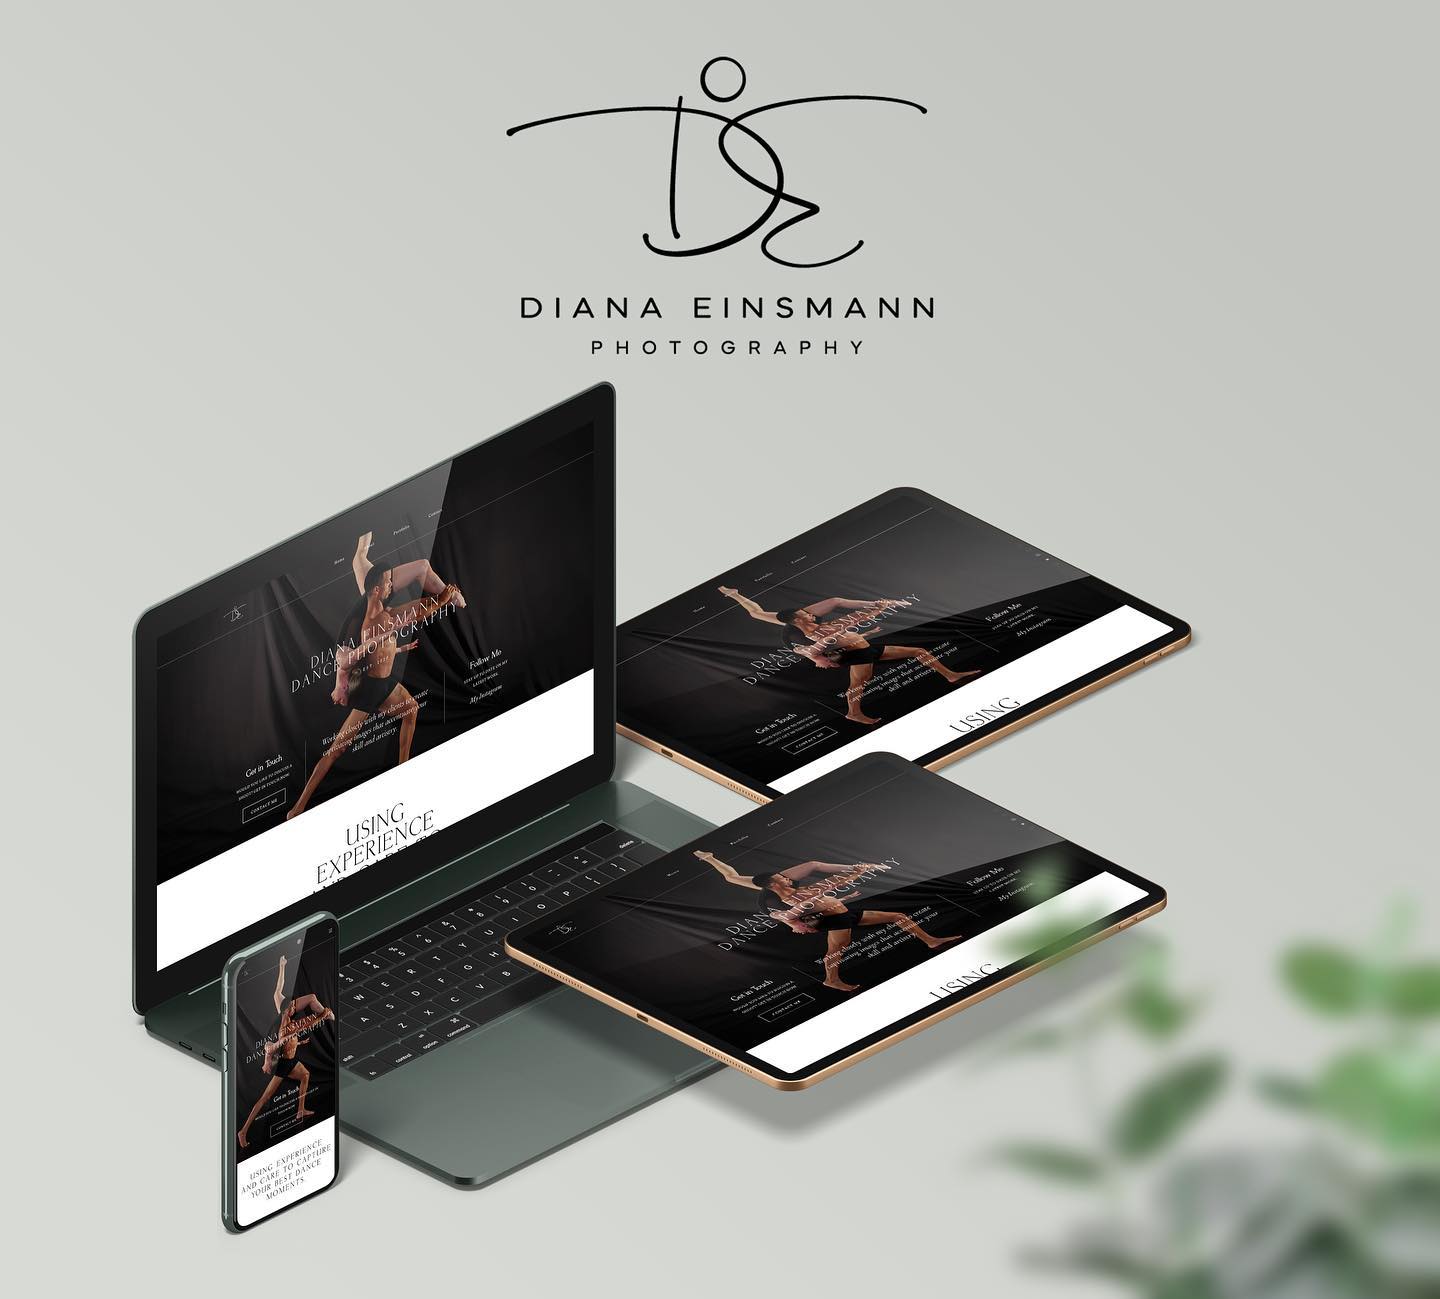 🚀Just Launched🚀 An elegant new website and logo for Dance Photographer Diana Einsmann (@dianaeinsmannphotography).

Check it out at www.dephotography.ca 

#ygk #ygklove #ygklogodesign #ygkwebdesign #kingstonon #kingston #wordpress